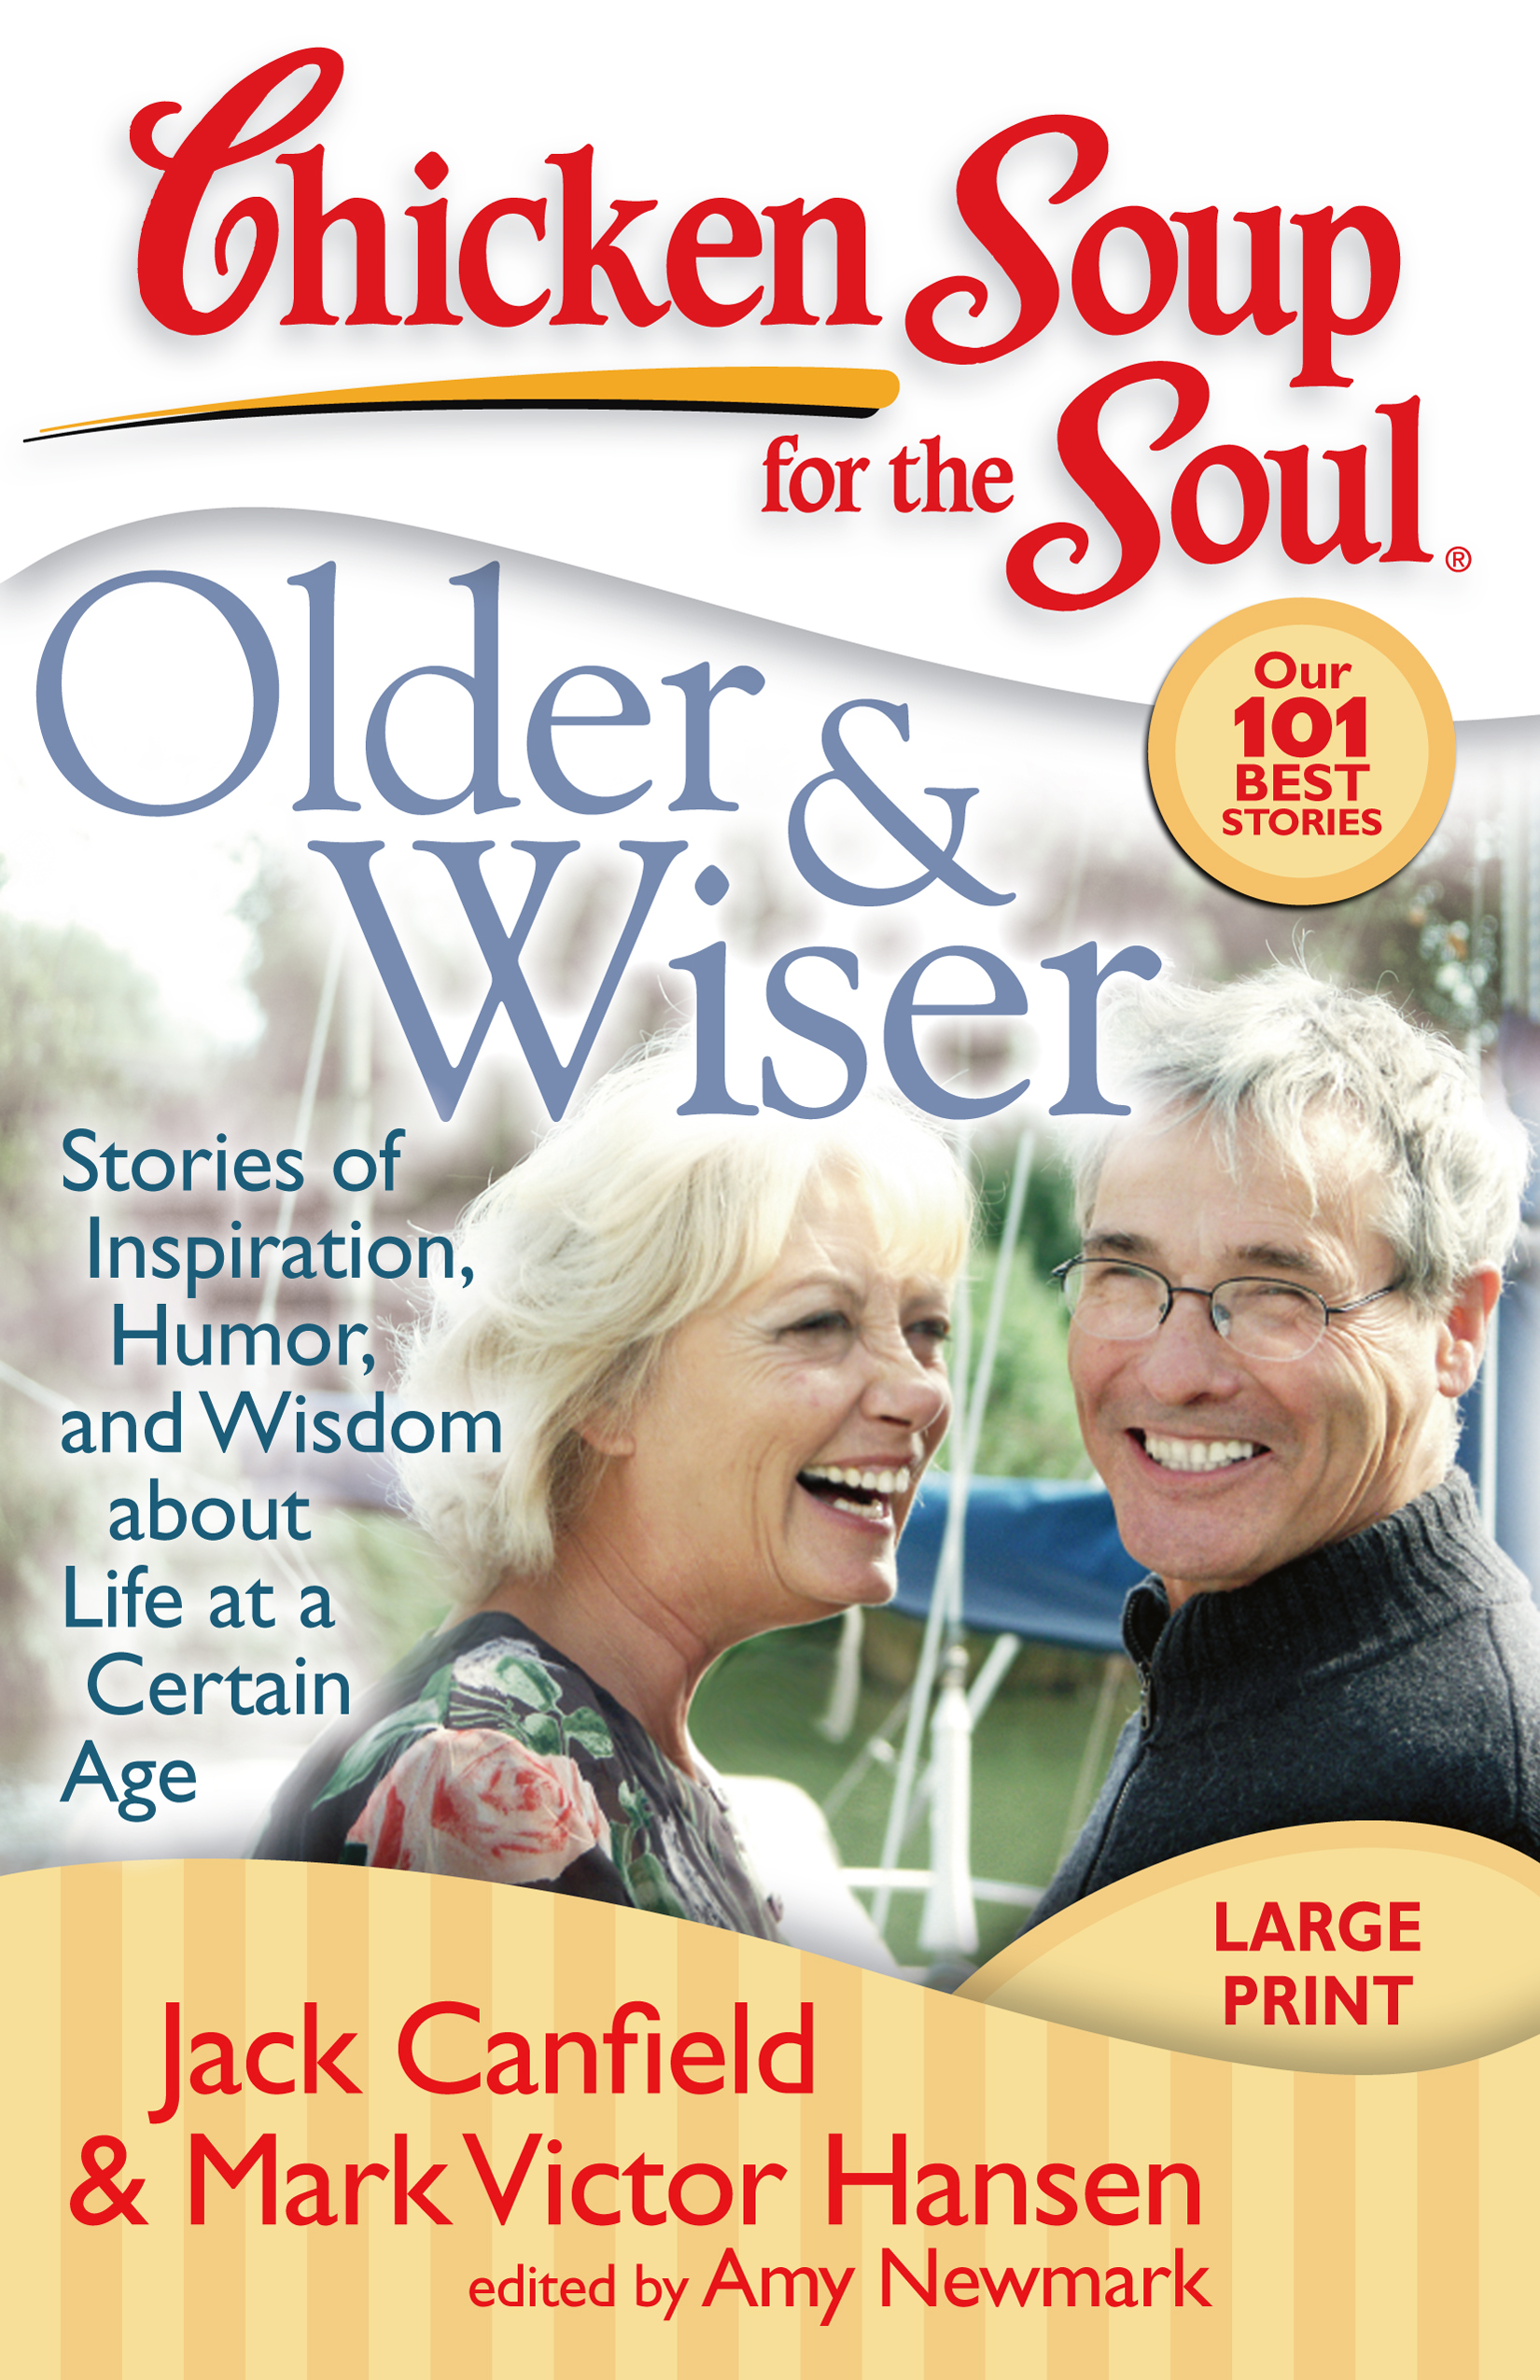 stories from chicken soup for the soul